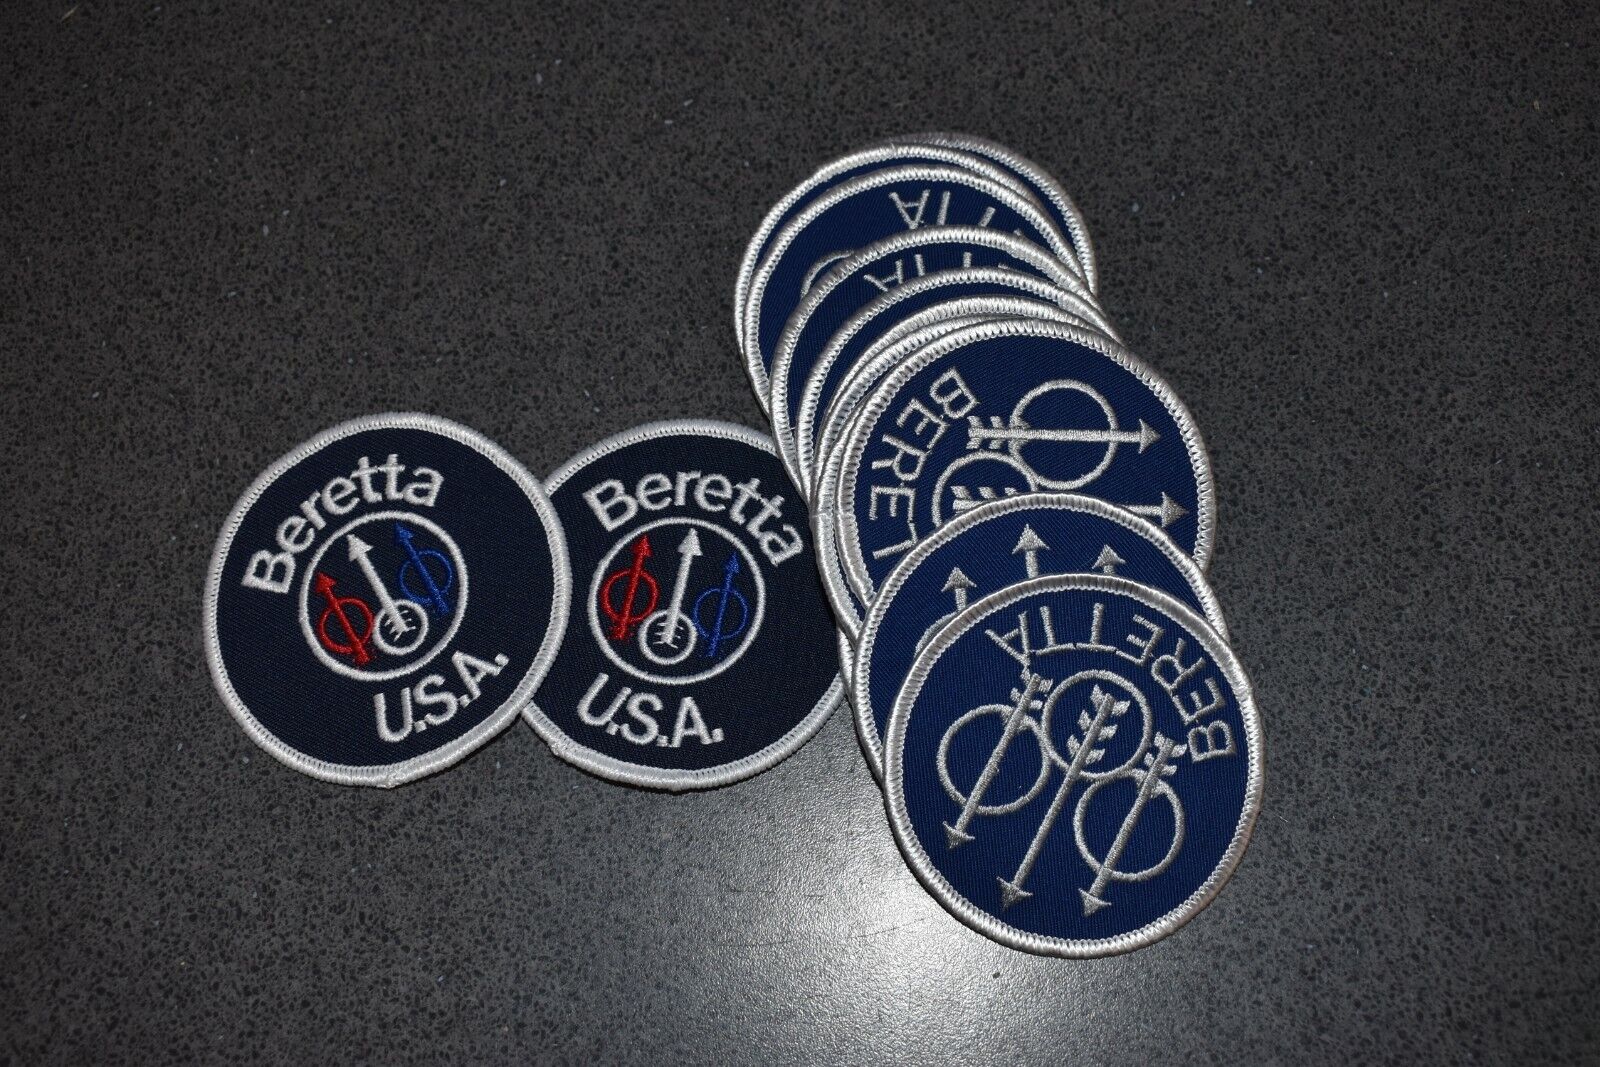 Lot of 19 Beretta Patches, NEW